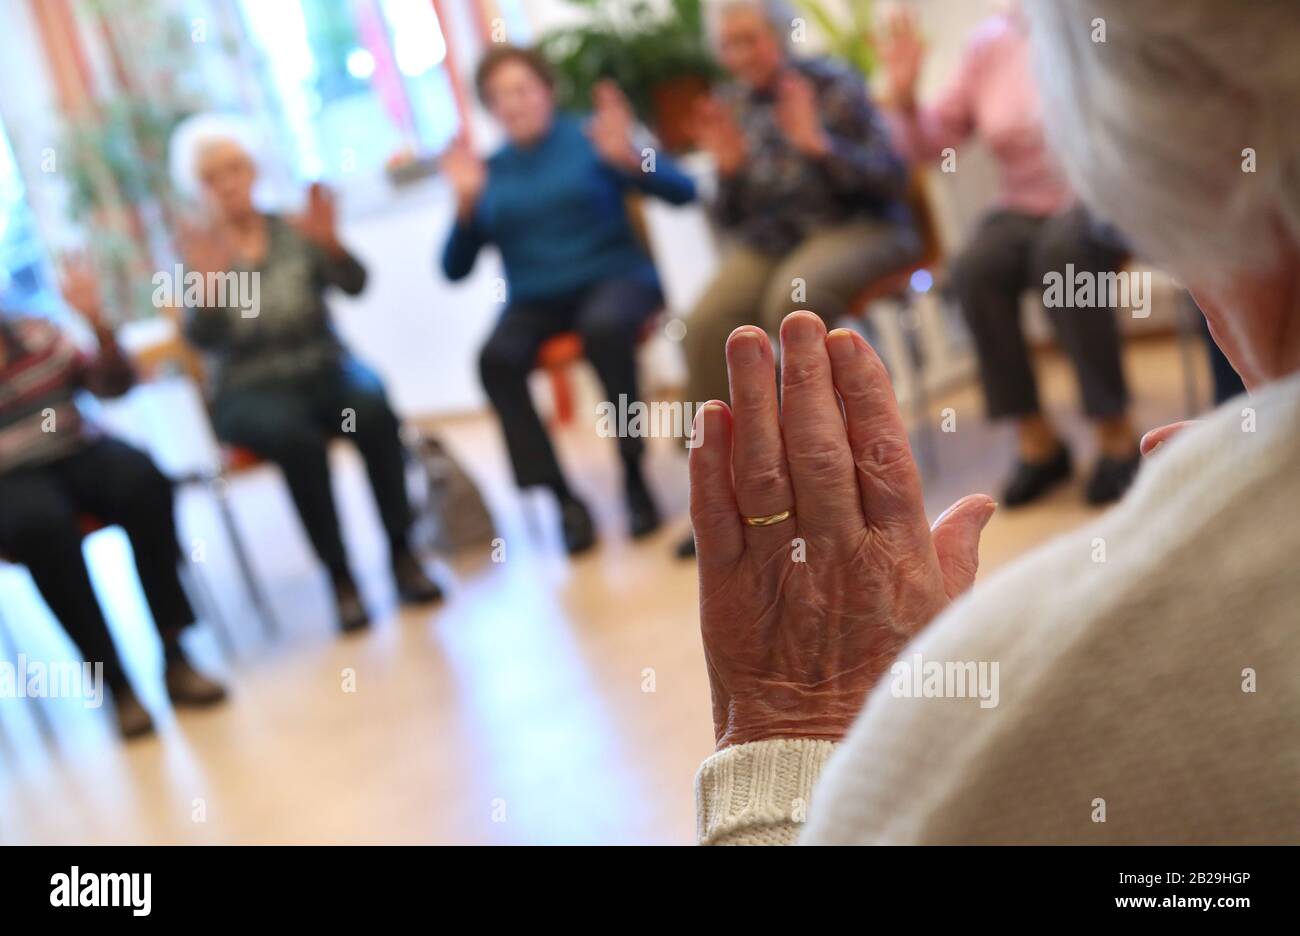 Altusried, Germany. 21st Feb, 2020. Senior citizens sit together in the dementia residential community during a guided sitting gymnastics. To live self-determinedly despite the illness is the aim of the community (to dpa-KORR: "Here my mother can be a human being" - everyday life in a dementia shared flat"). Credit: Karl-Josef Hildenbrand/dpa - ATTENTION: Only for editorial use in connection with current reporting and only with complete mention of the above credit/dpa/Alamy Live News Stock Photo